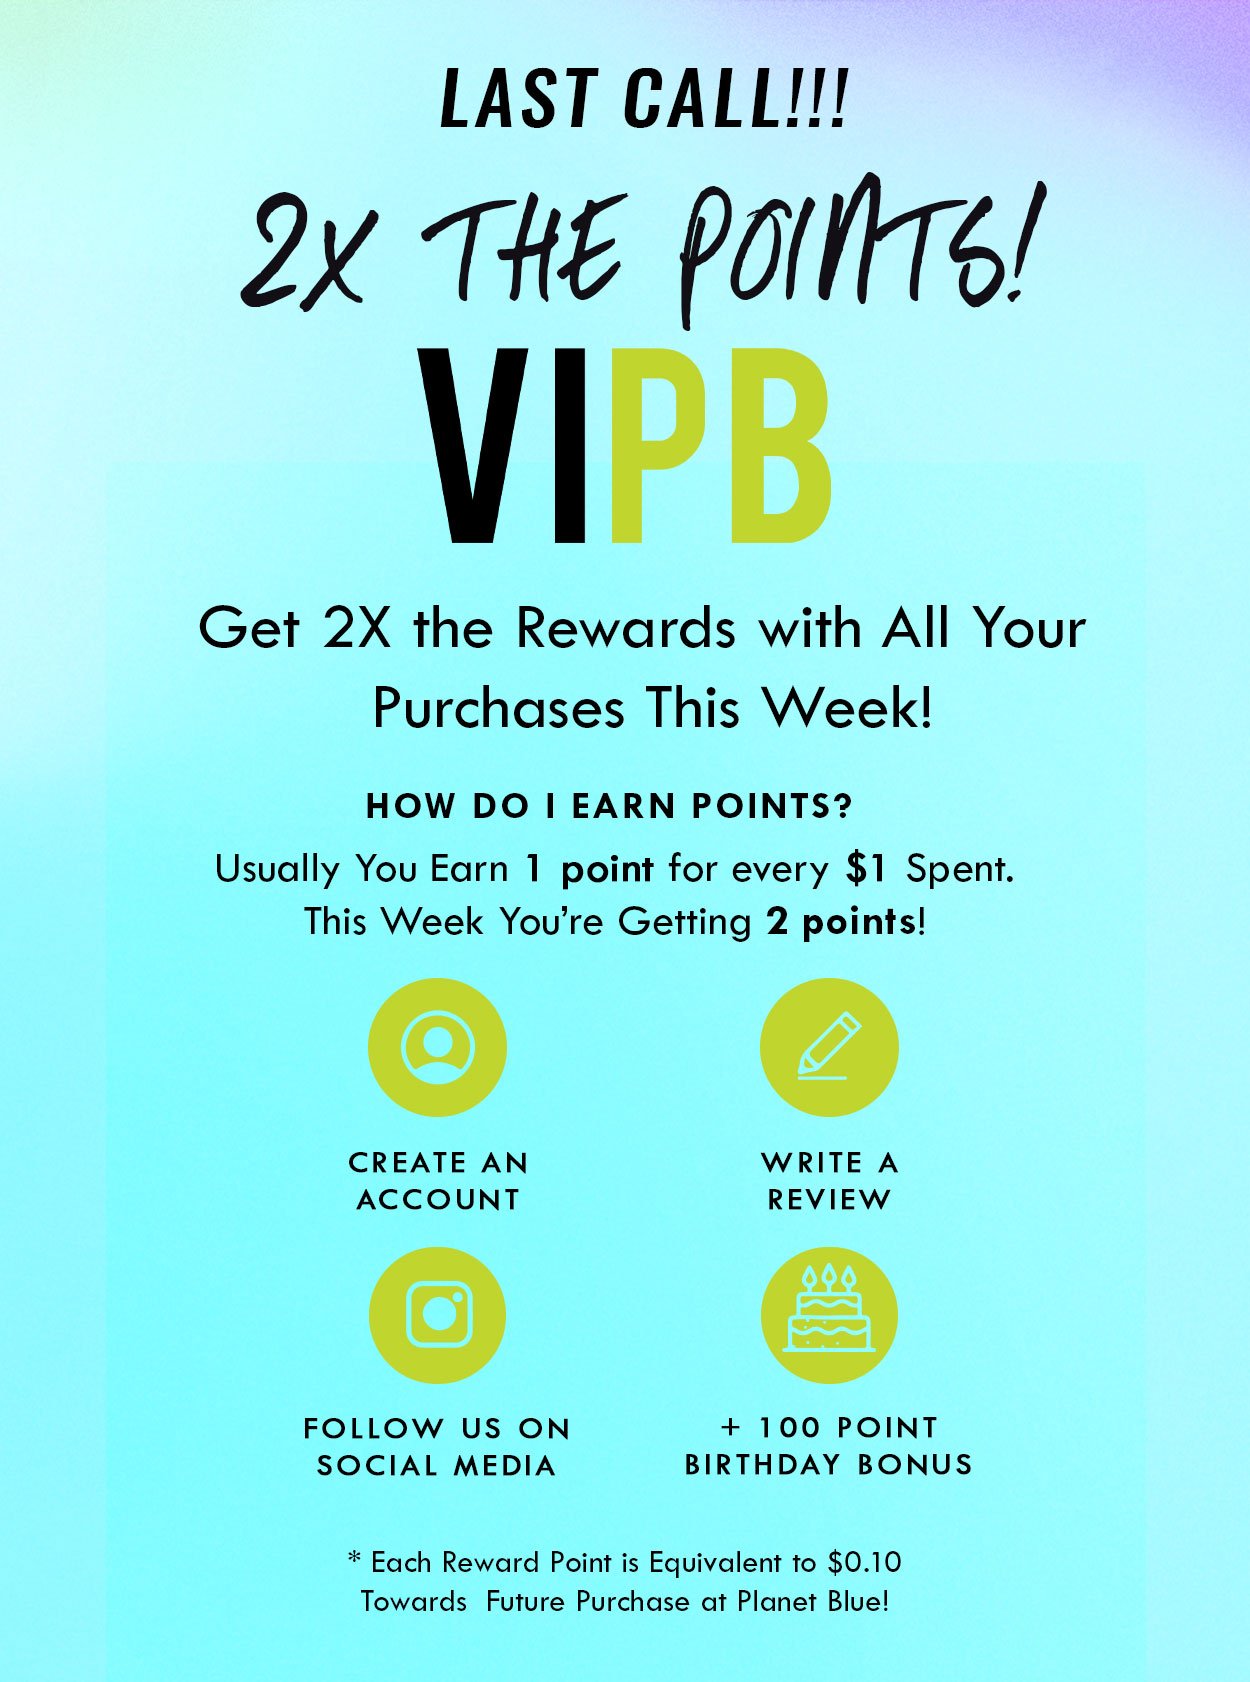 Join VIPB Today! Our new loyalty program allows you to earn points and unlock exclusive rewards!